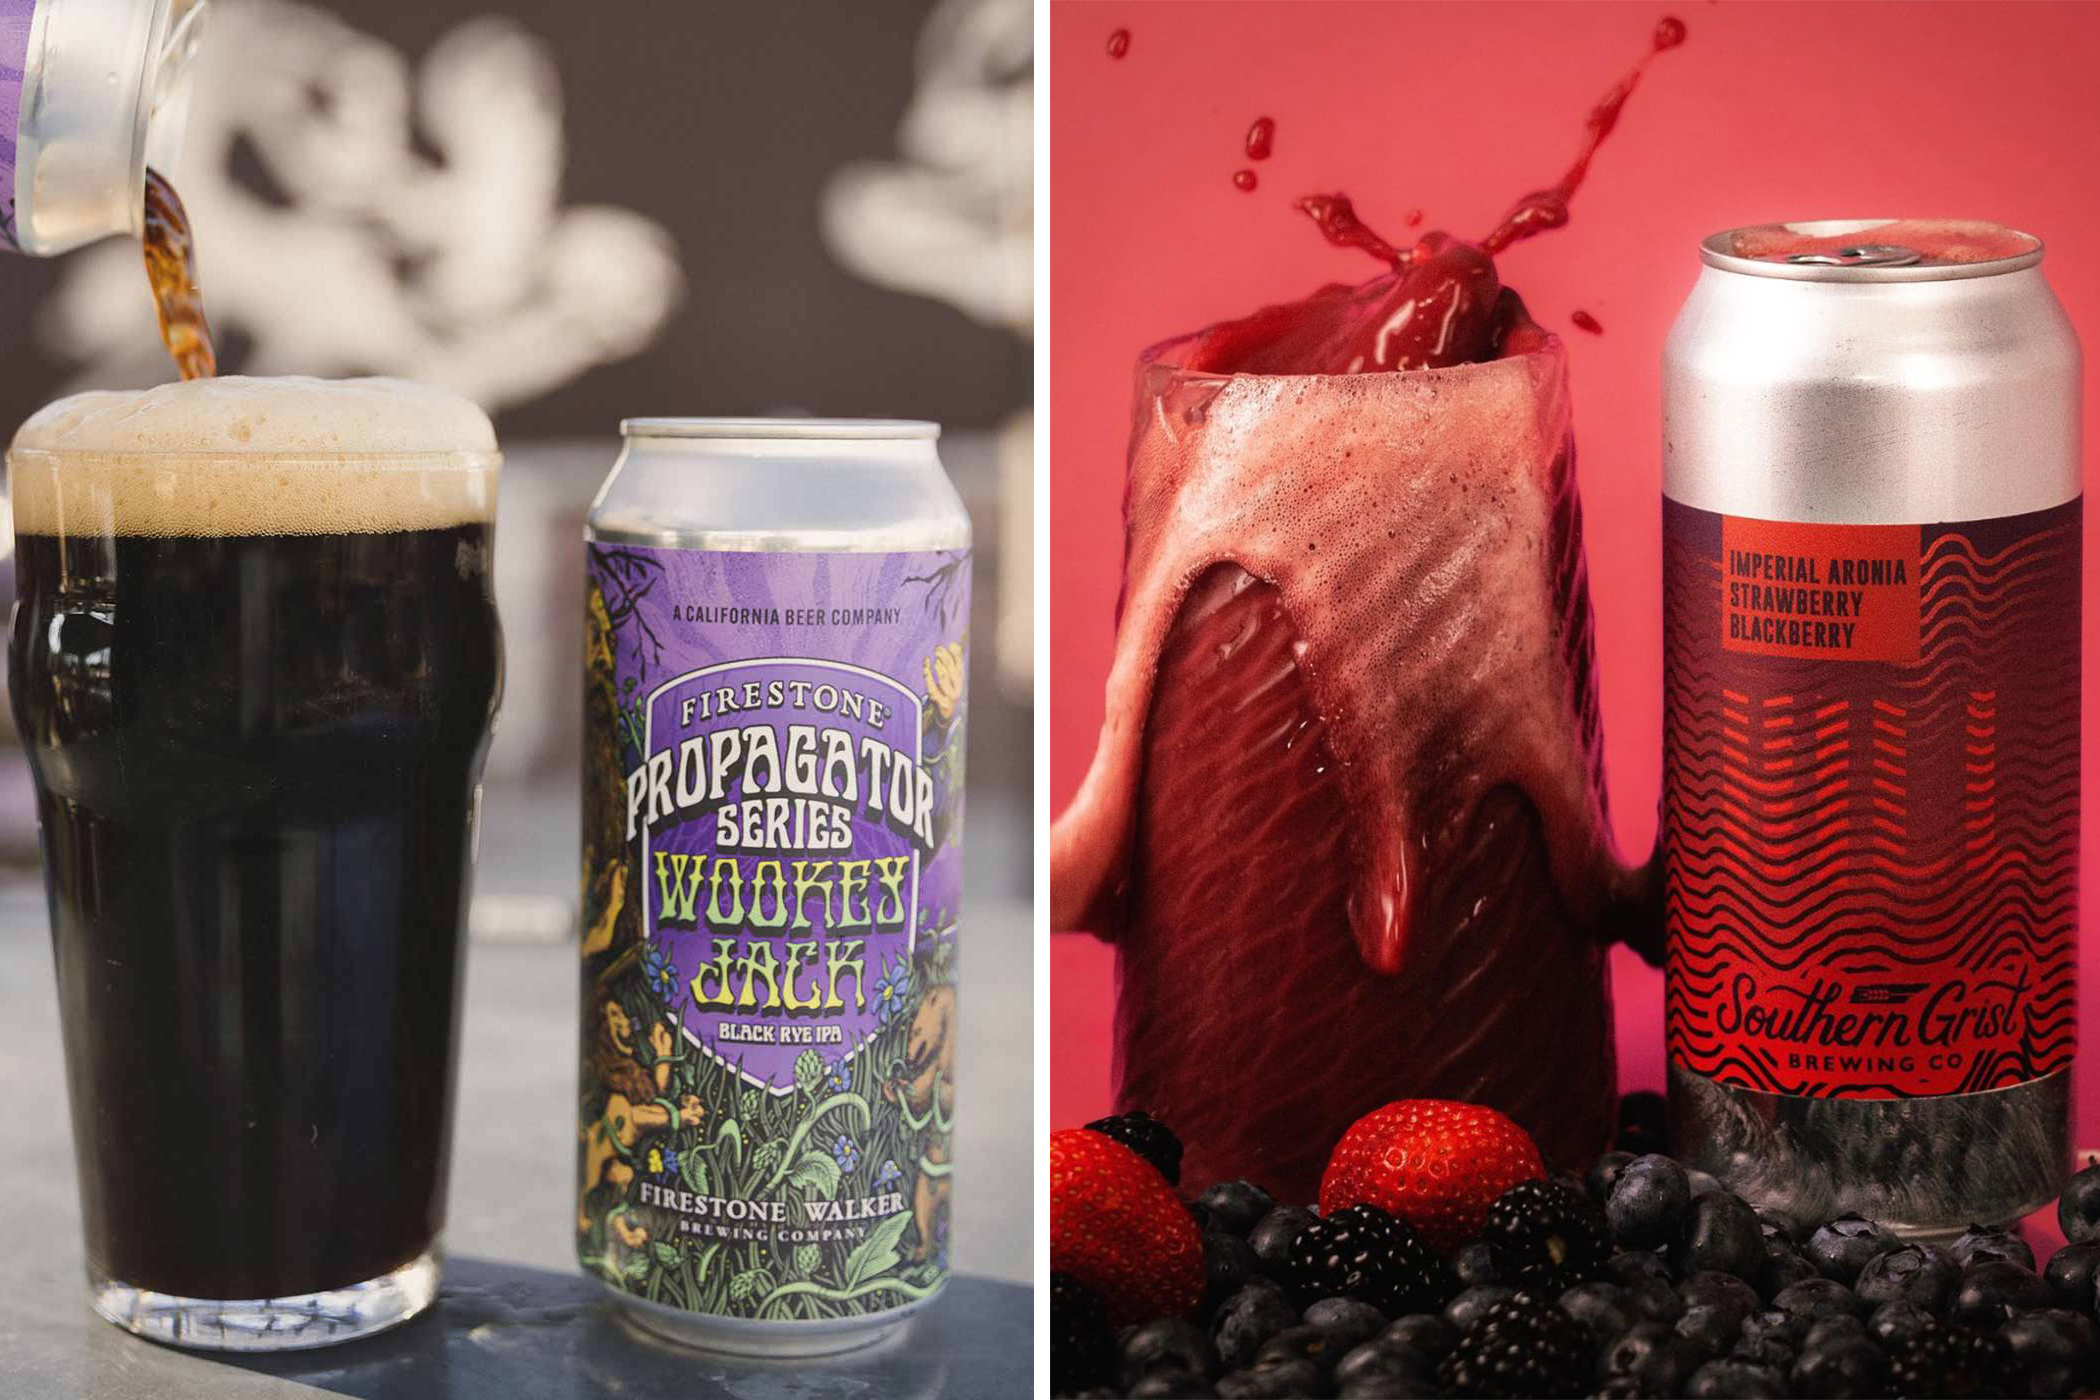 The Top 10 Beers We Drank in July